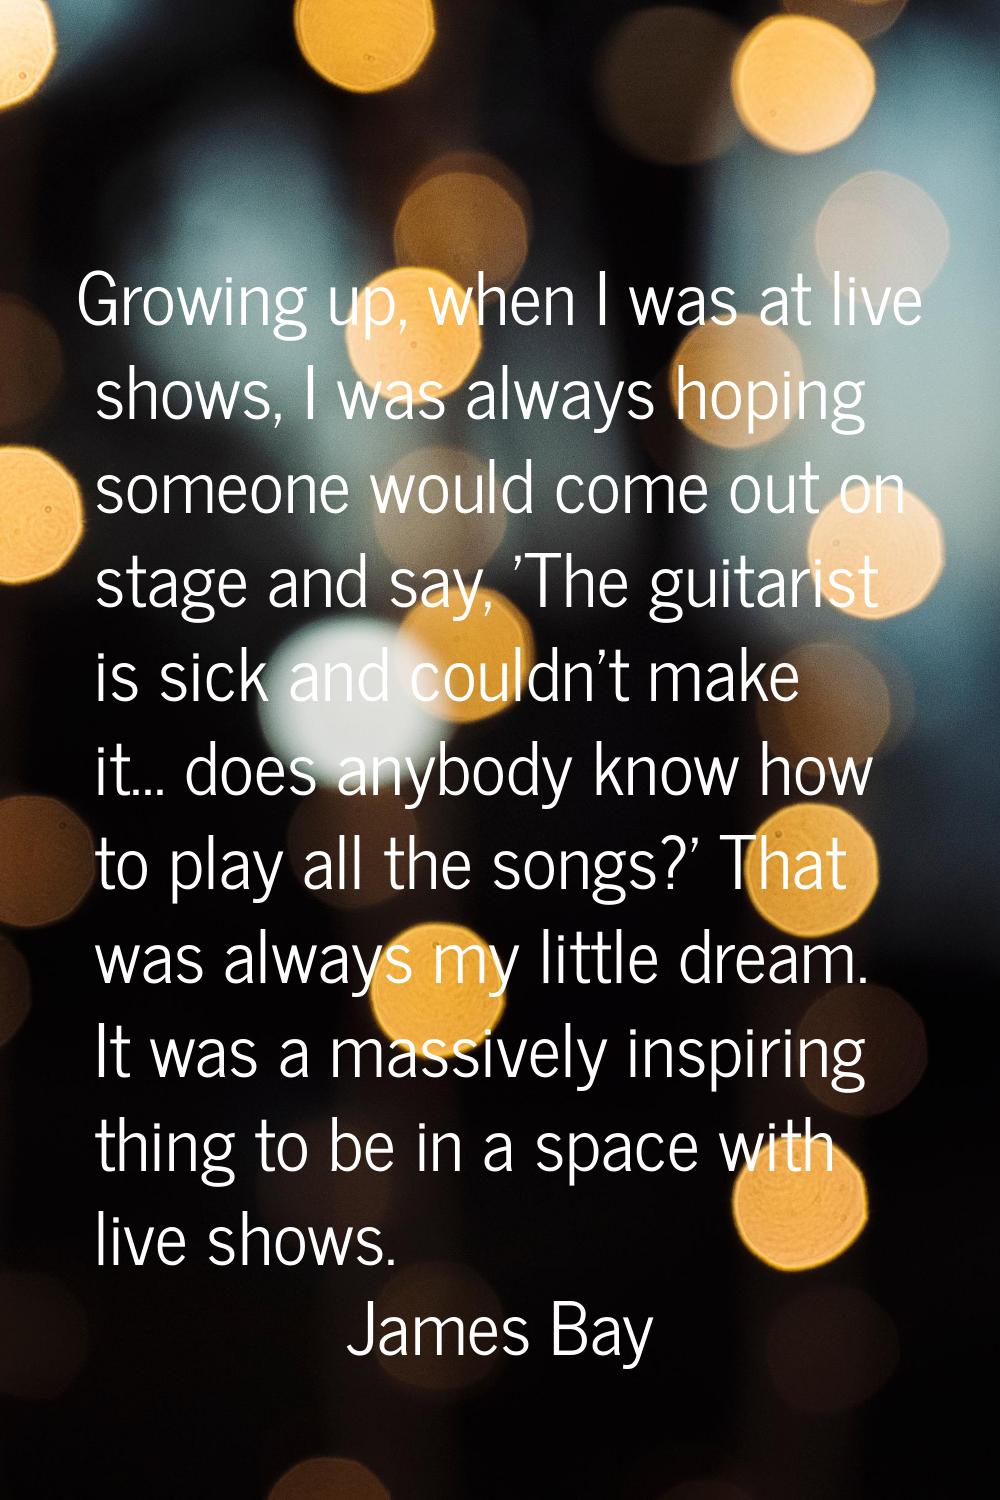 Growing up, when I was at live shows, I was always hoping someone would come out on stage and say, 